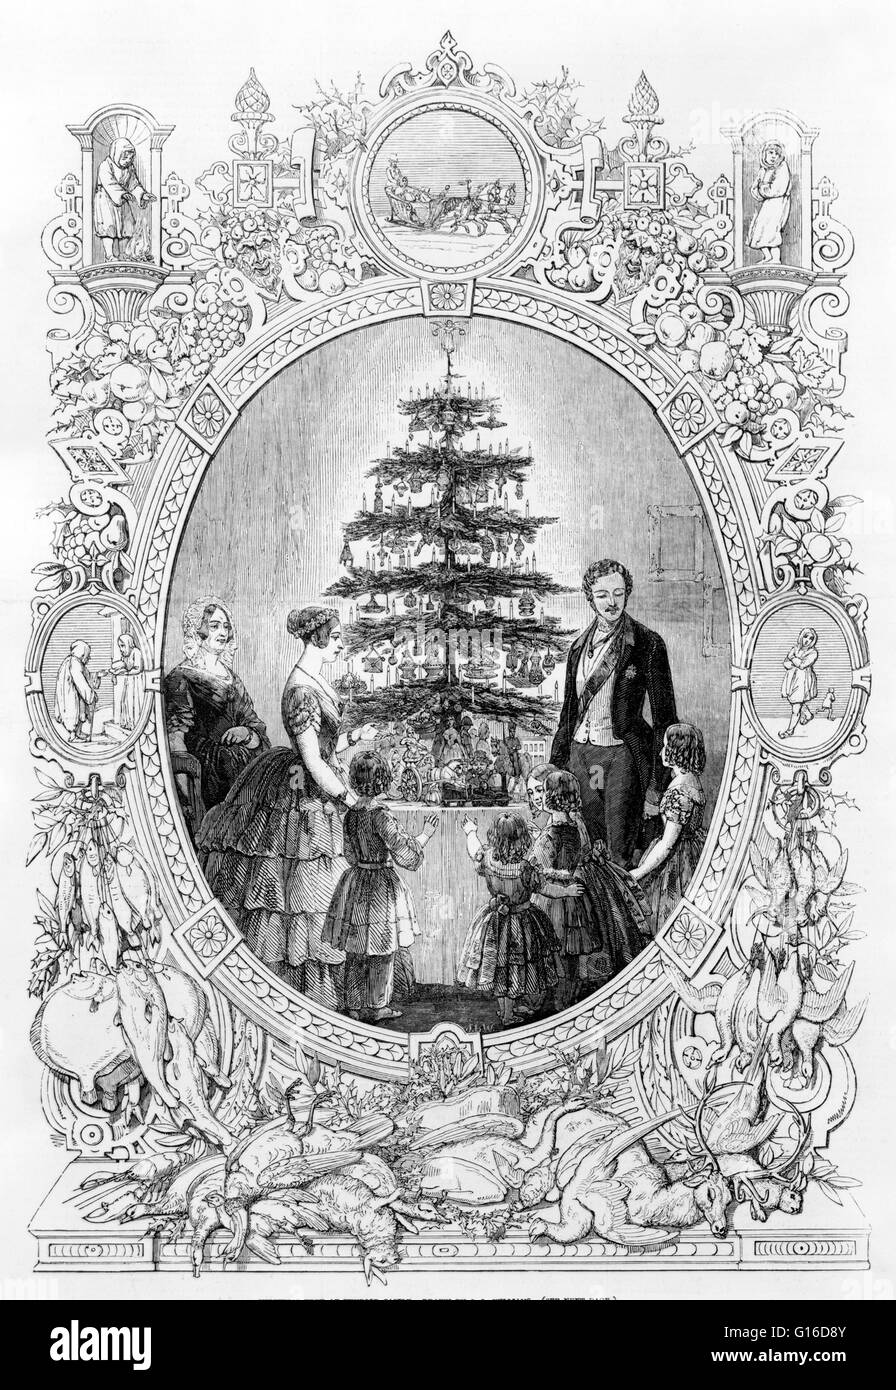 Entitled: 'Christmas tree at Windsor Castle' engraving of the royal family around Christmas tree, depicted in an oval with border showing winter scenes and the fruits and animals of a bountiful harvest. A Christmas tree is a decorated tree, usually an eve Stock Photo